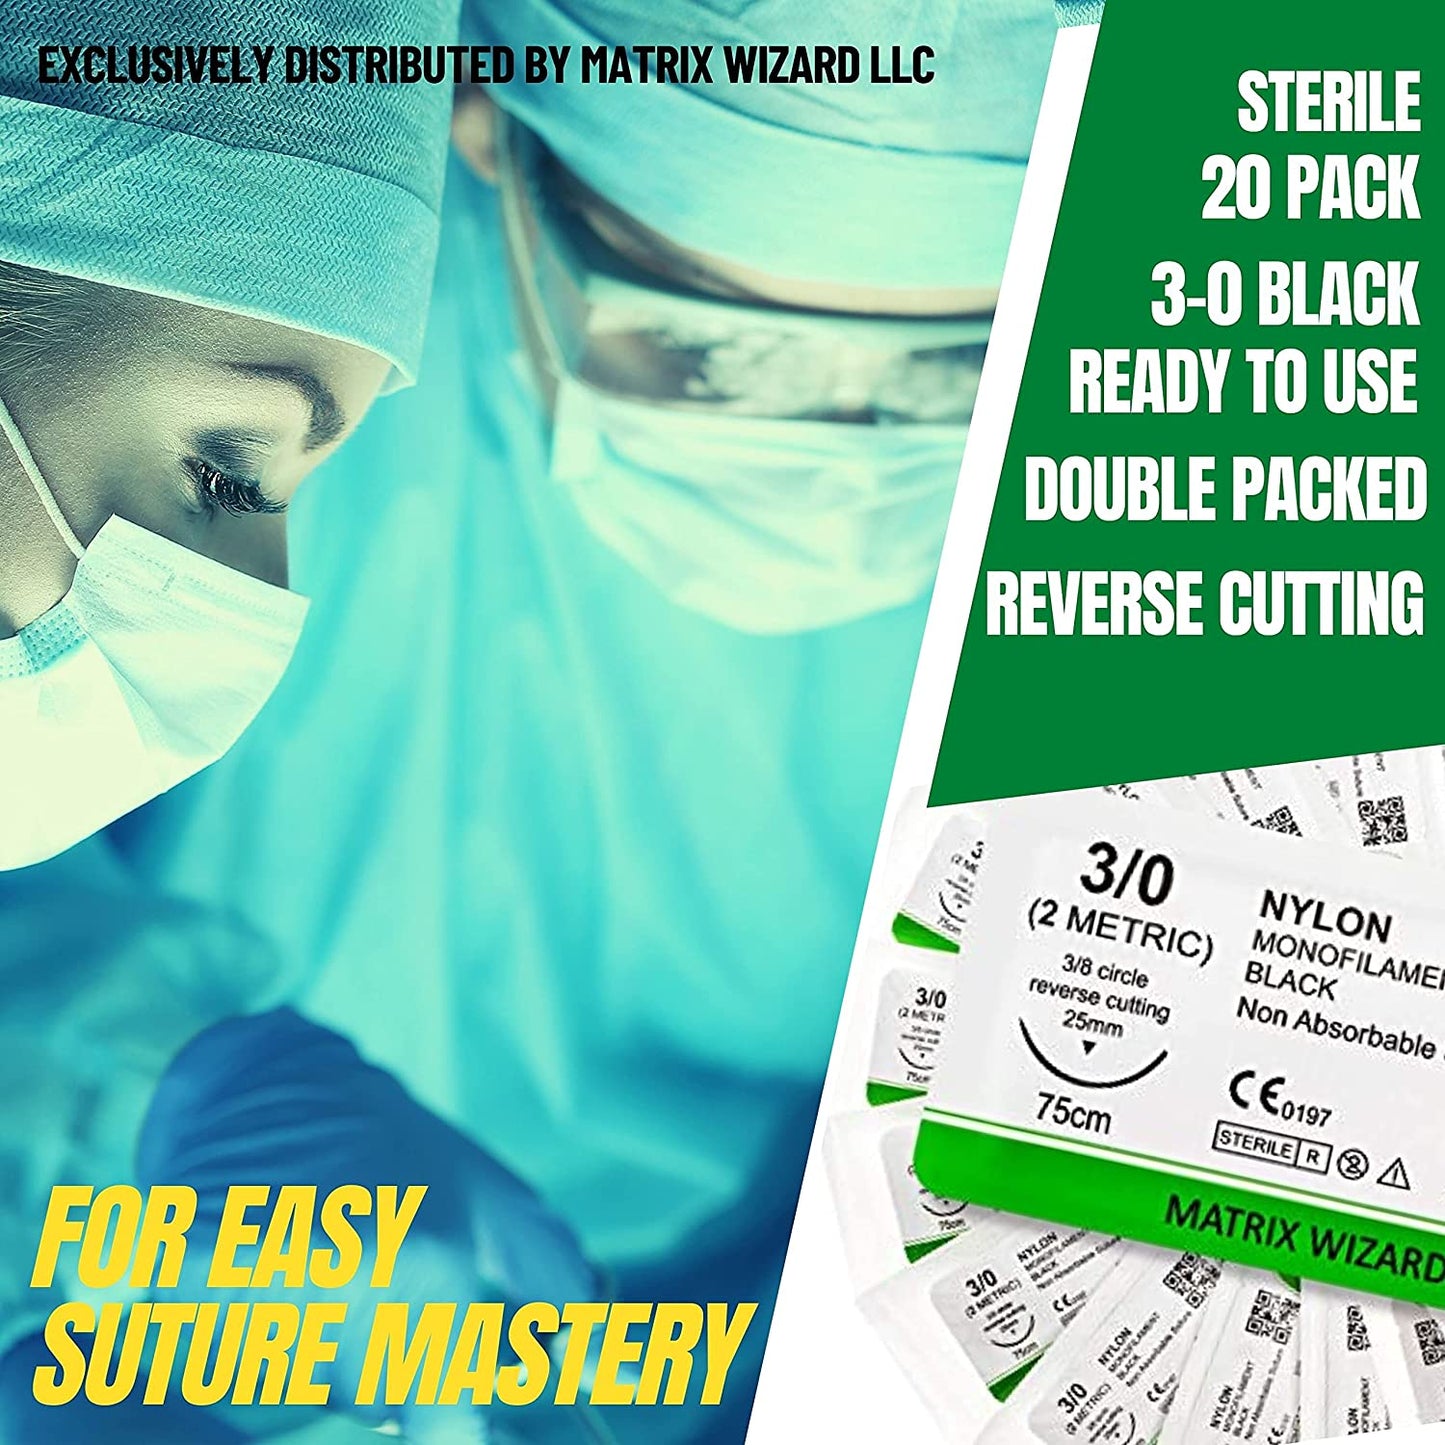 3-0 Sterile Sutures Thread with Needle (24 PK Black Monofilament) - Medical and Nursing Student's Surgical Practice Suture Kit, Training with Stitching Pad, Taxidermy, Vet Use